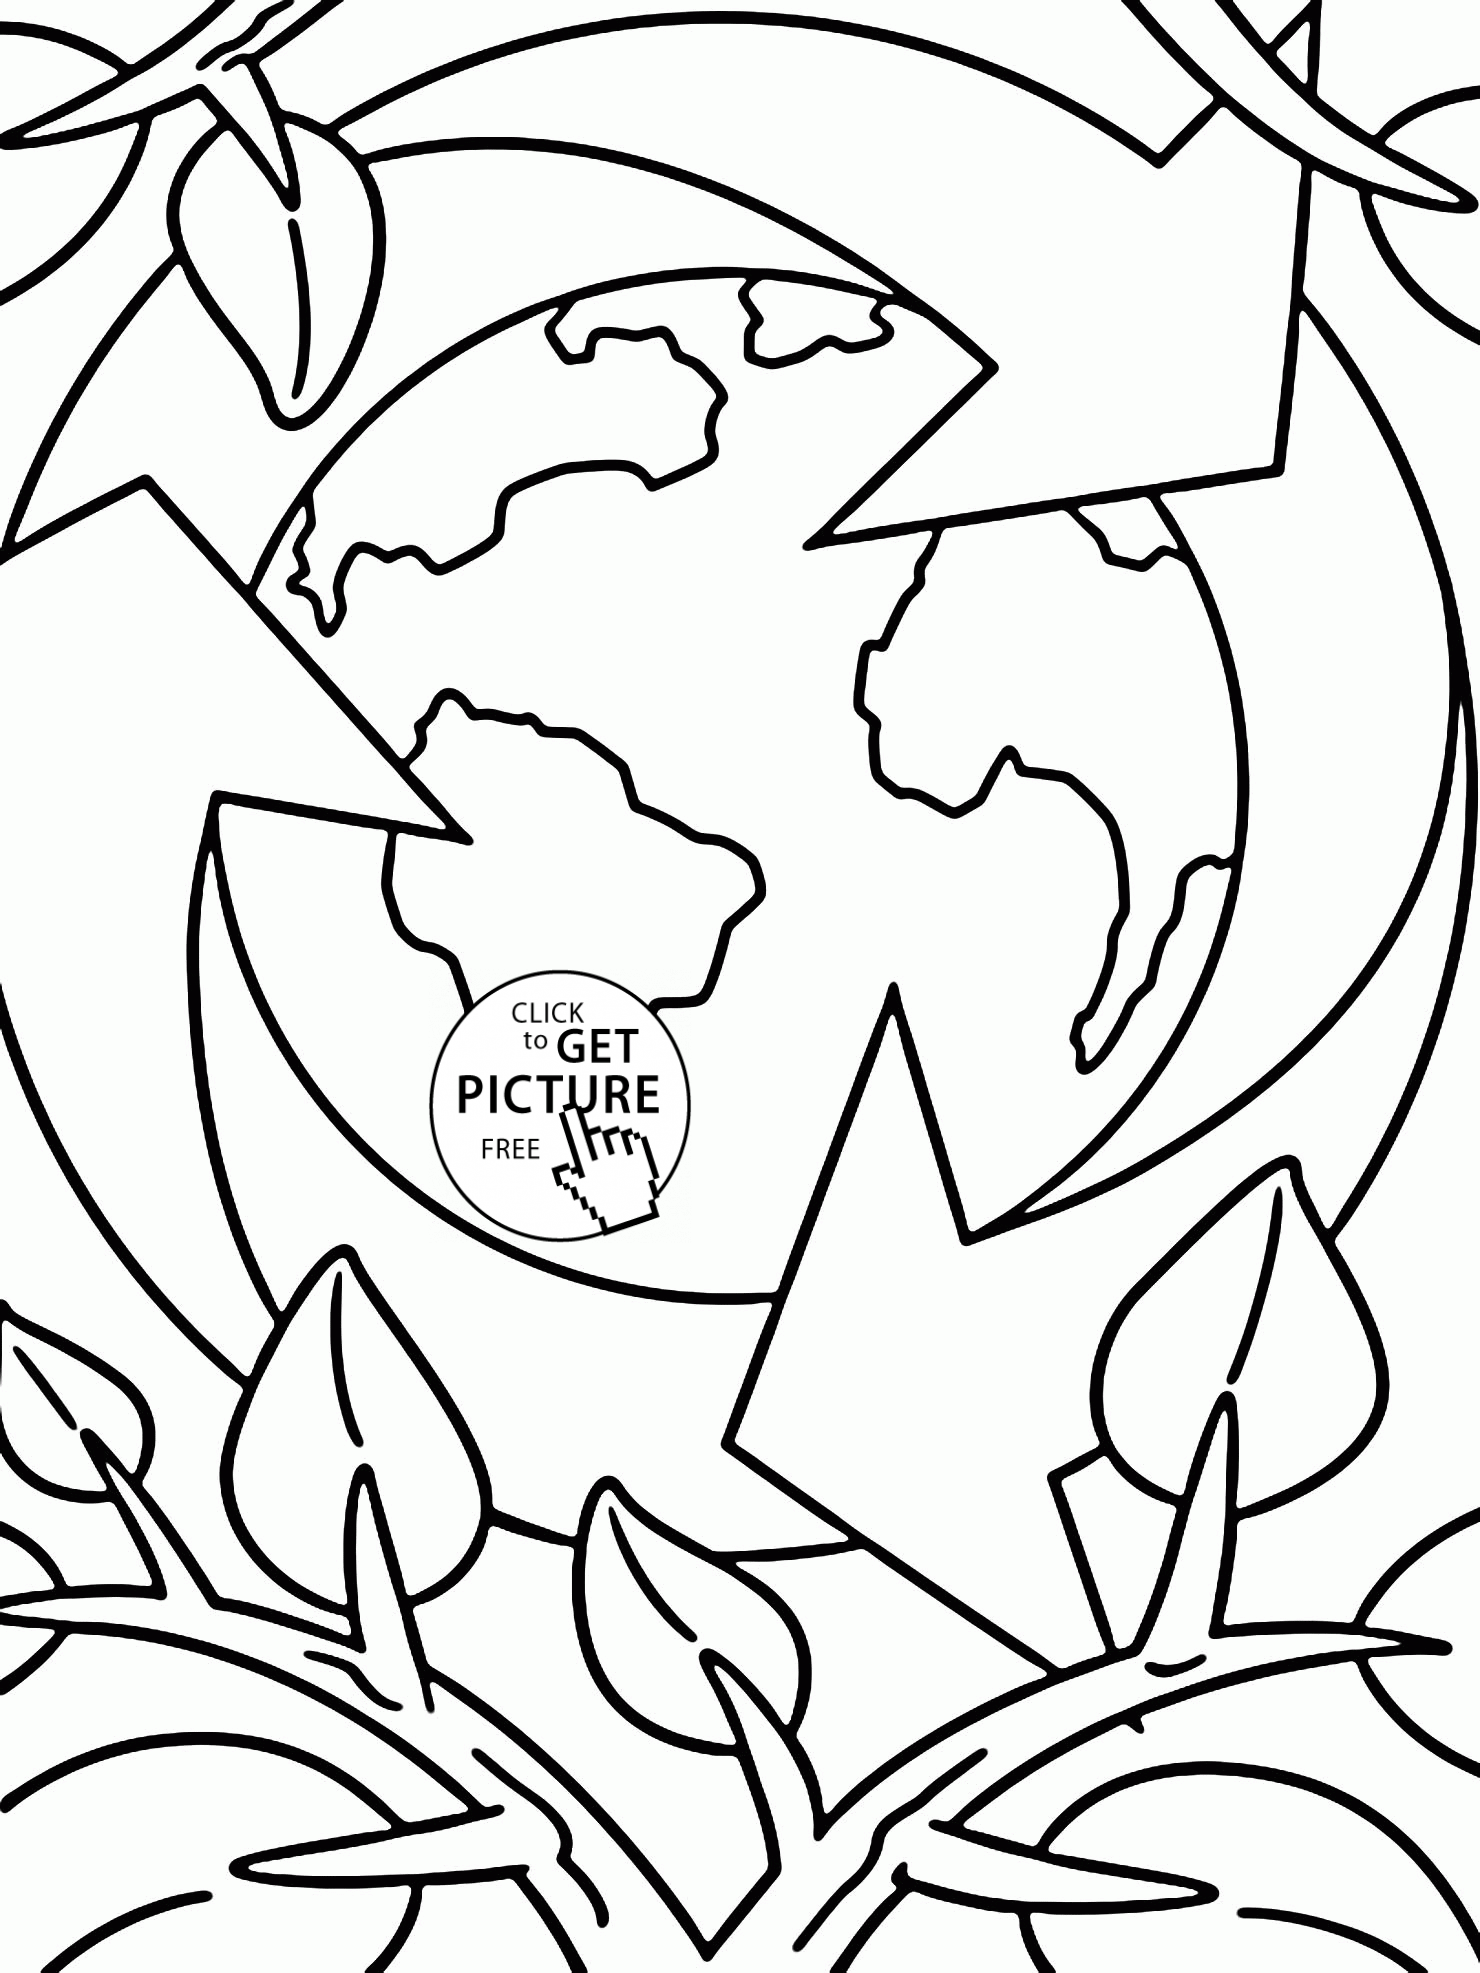 Save Earth Coloring Pages - Coloring Home